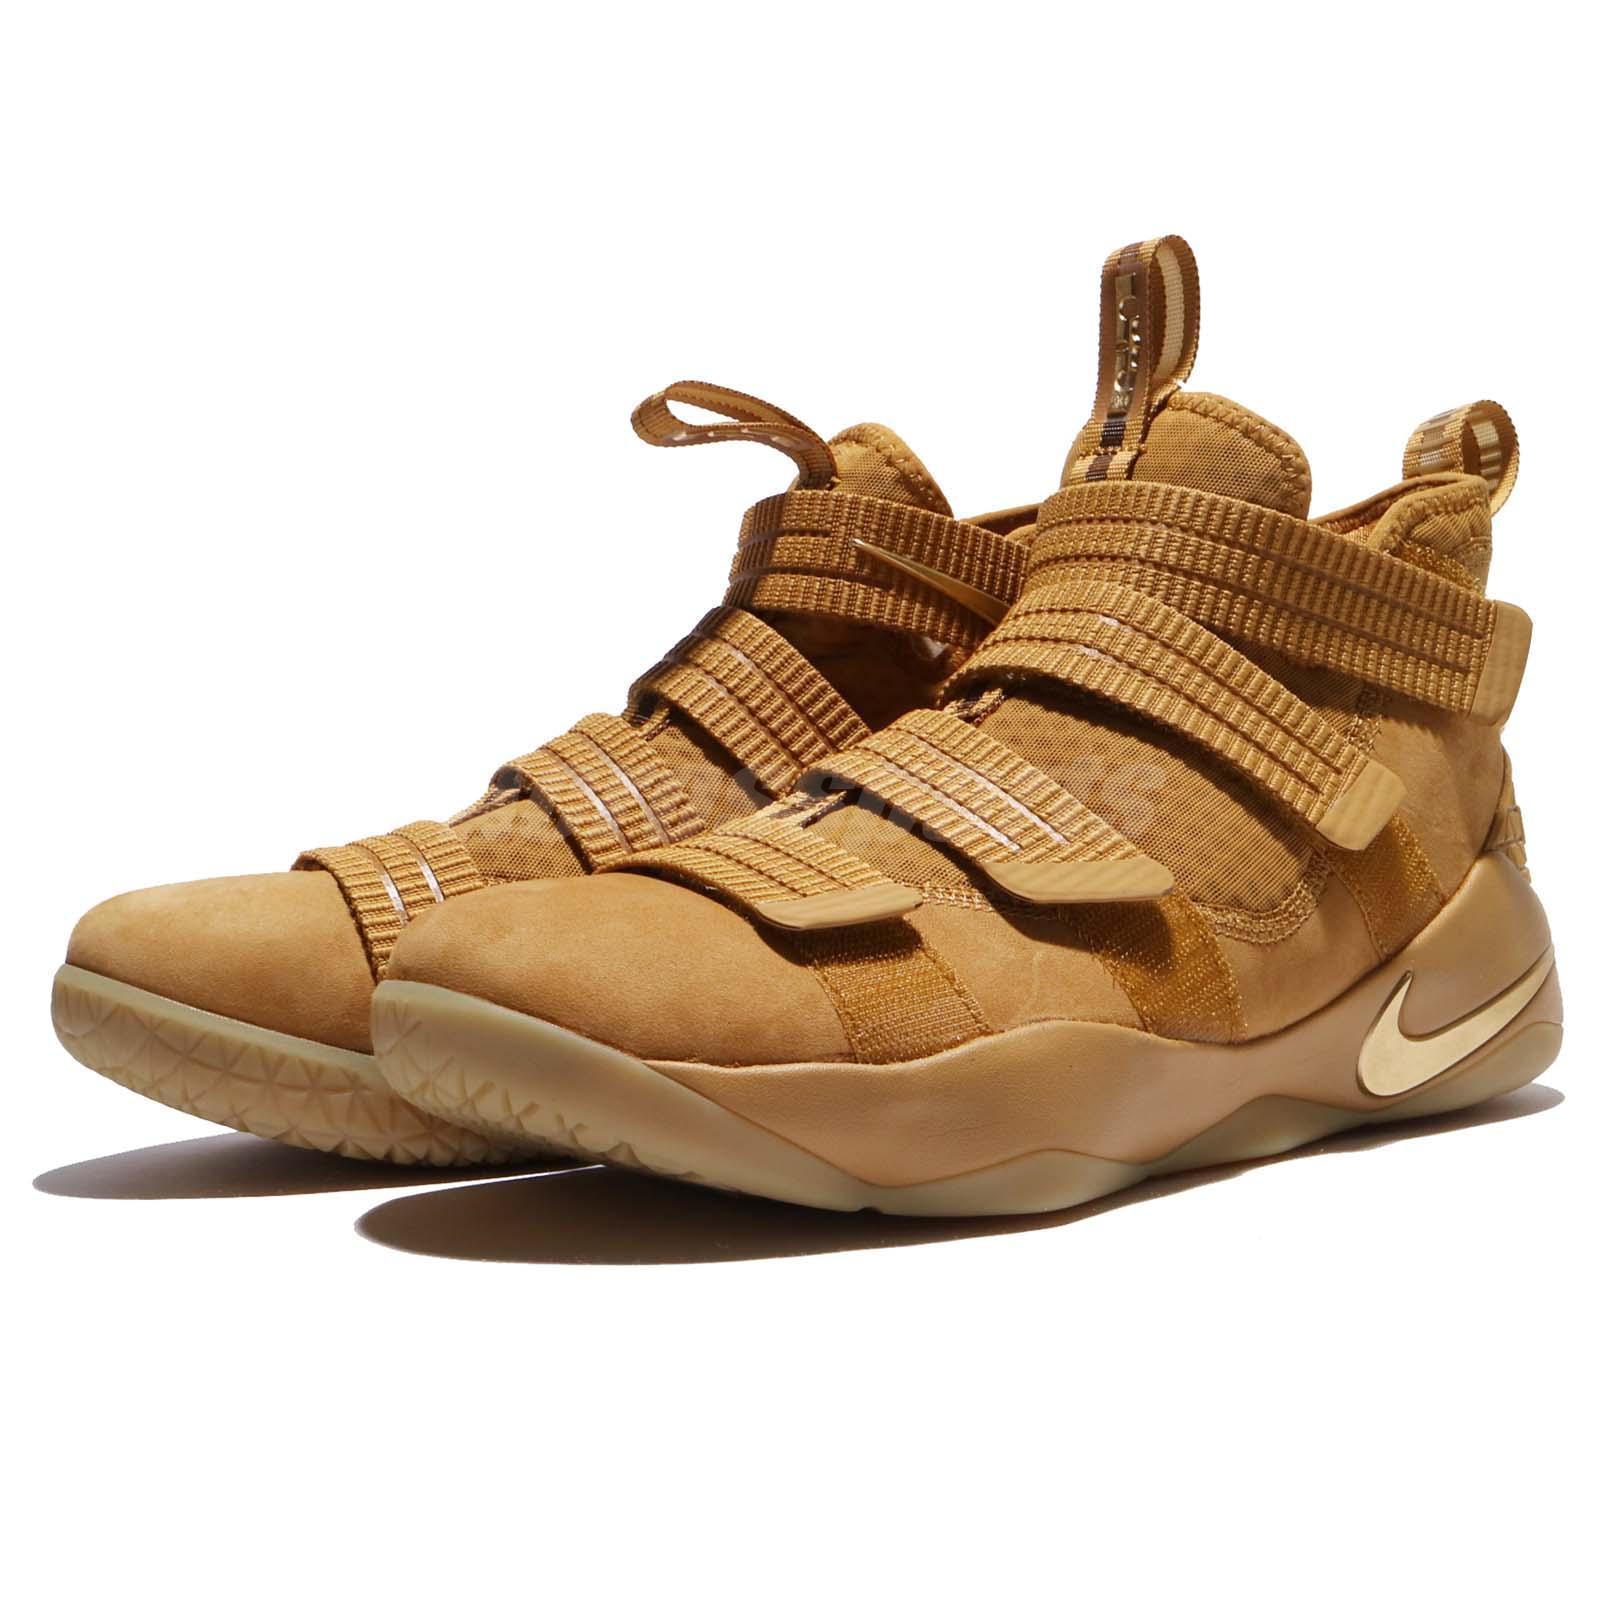 agricultores Ingenieros Estándar There is a Wheat Nike LeBron Soldier 11 SFG Coming - WearTesters